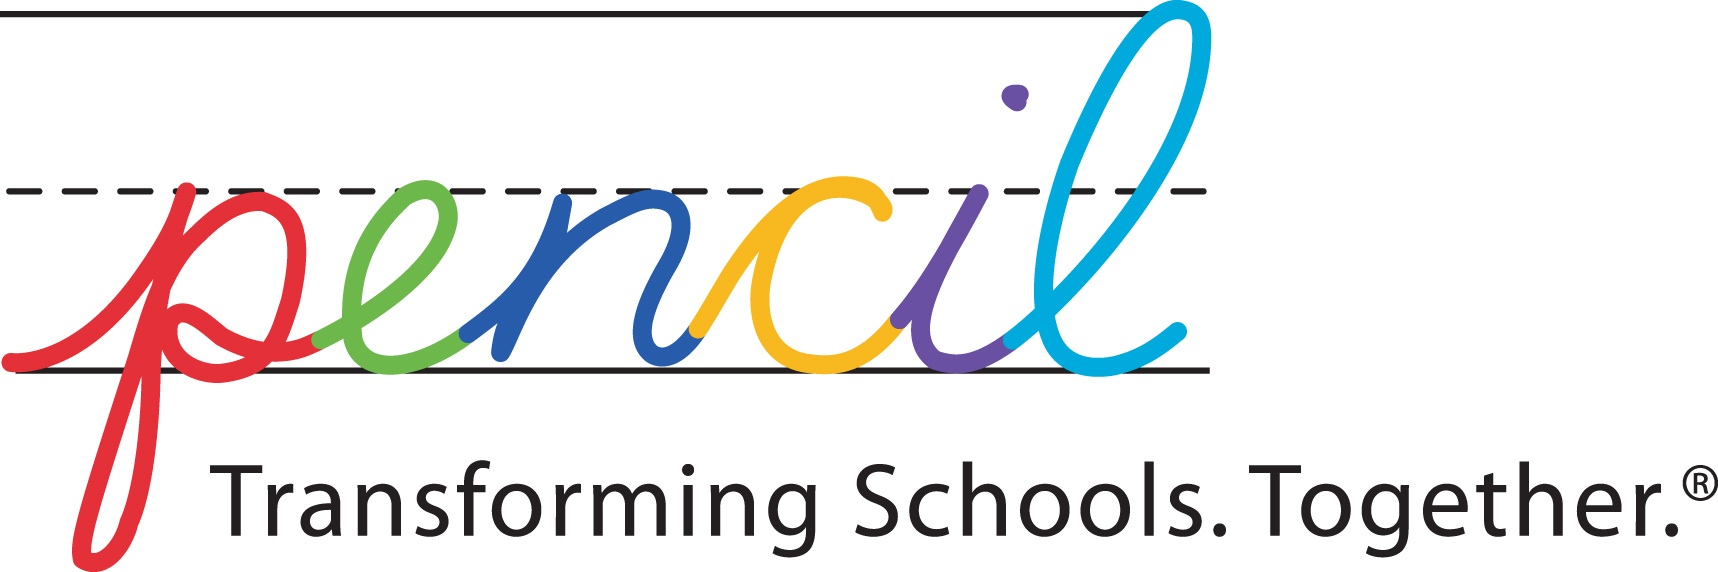 Private Sector and Education Leaders to Celebrate Partnerships that Are Transforming Public Schools at PENCIL's Spring Gala  Image